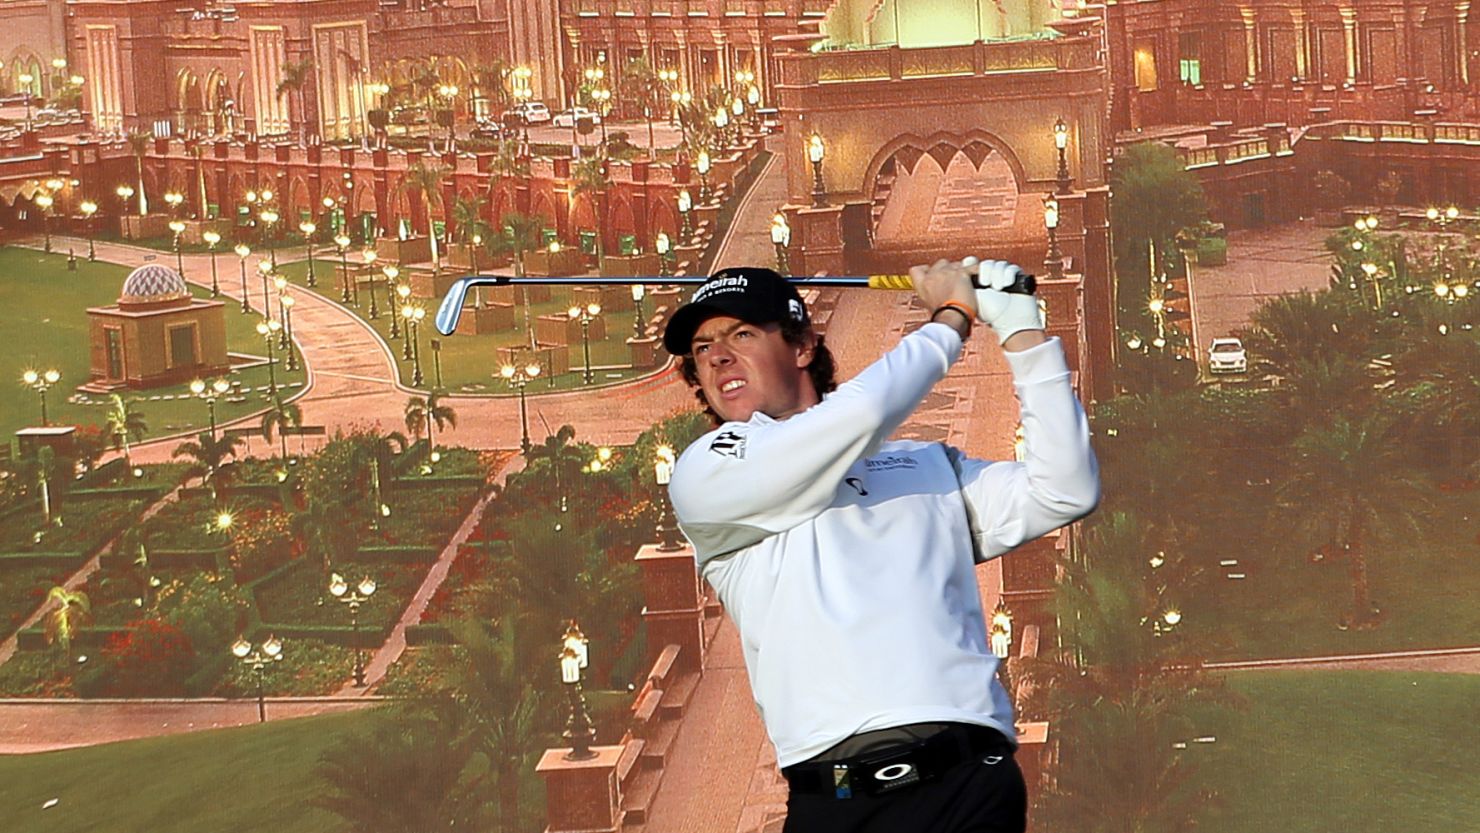 Roy McIlroy led the Abu Dhabi Golf Championship after an opening round of 67 on Thursday.